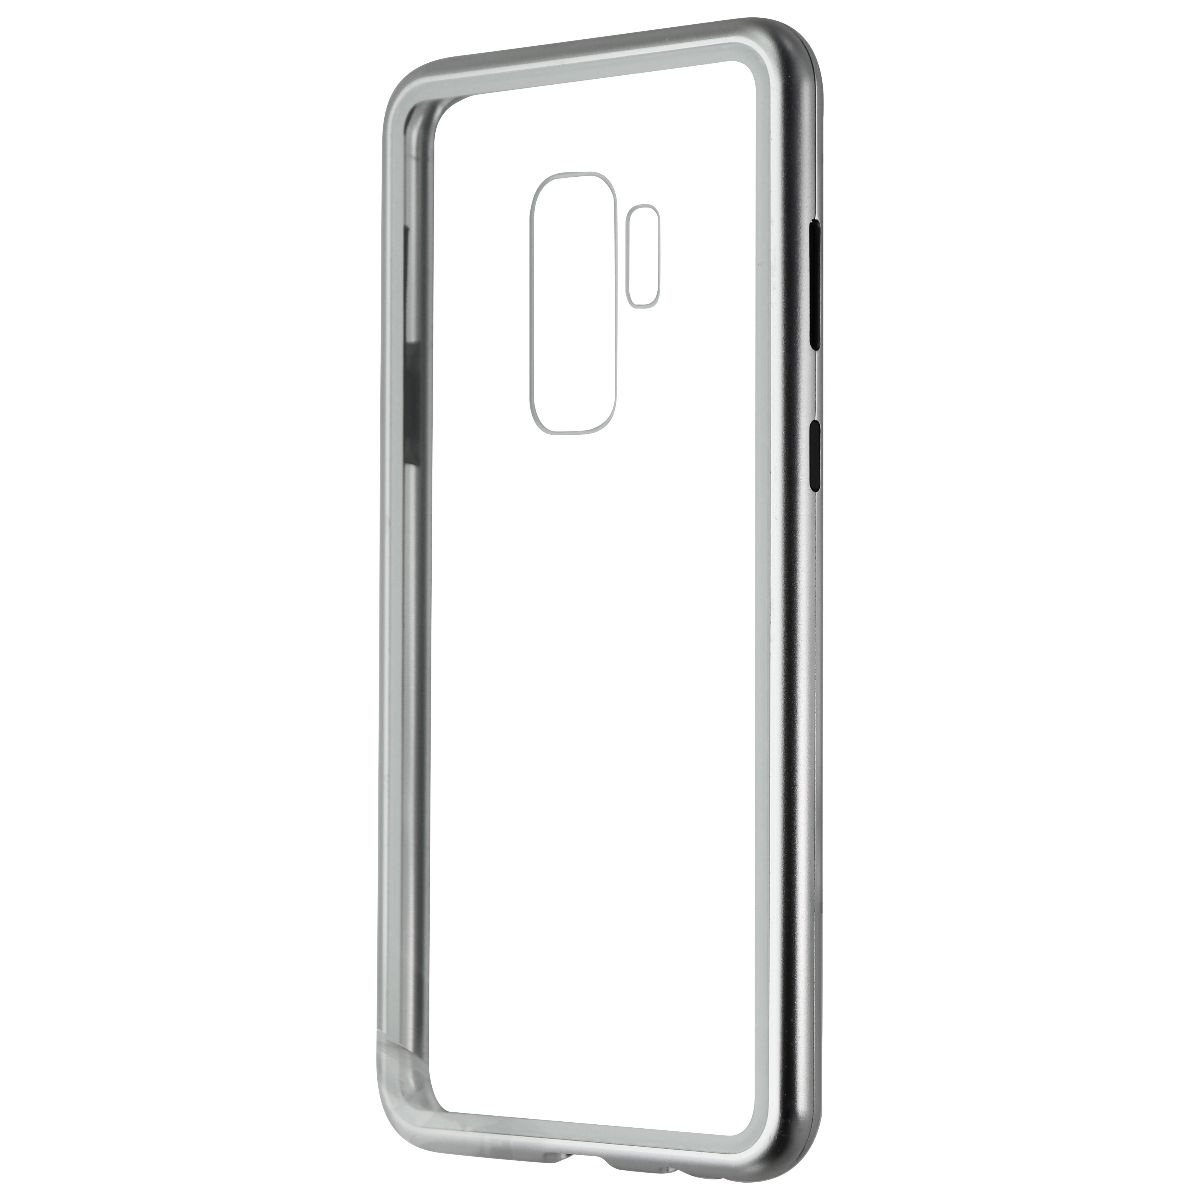 Zore Hybrid Glass Series Case For Samsung Galaxy S9 Plus - Clear/Silver